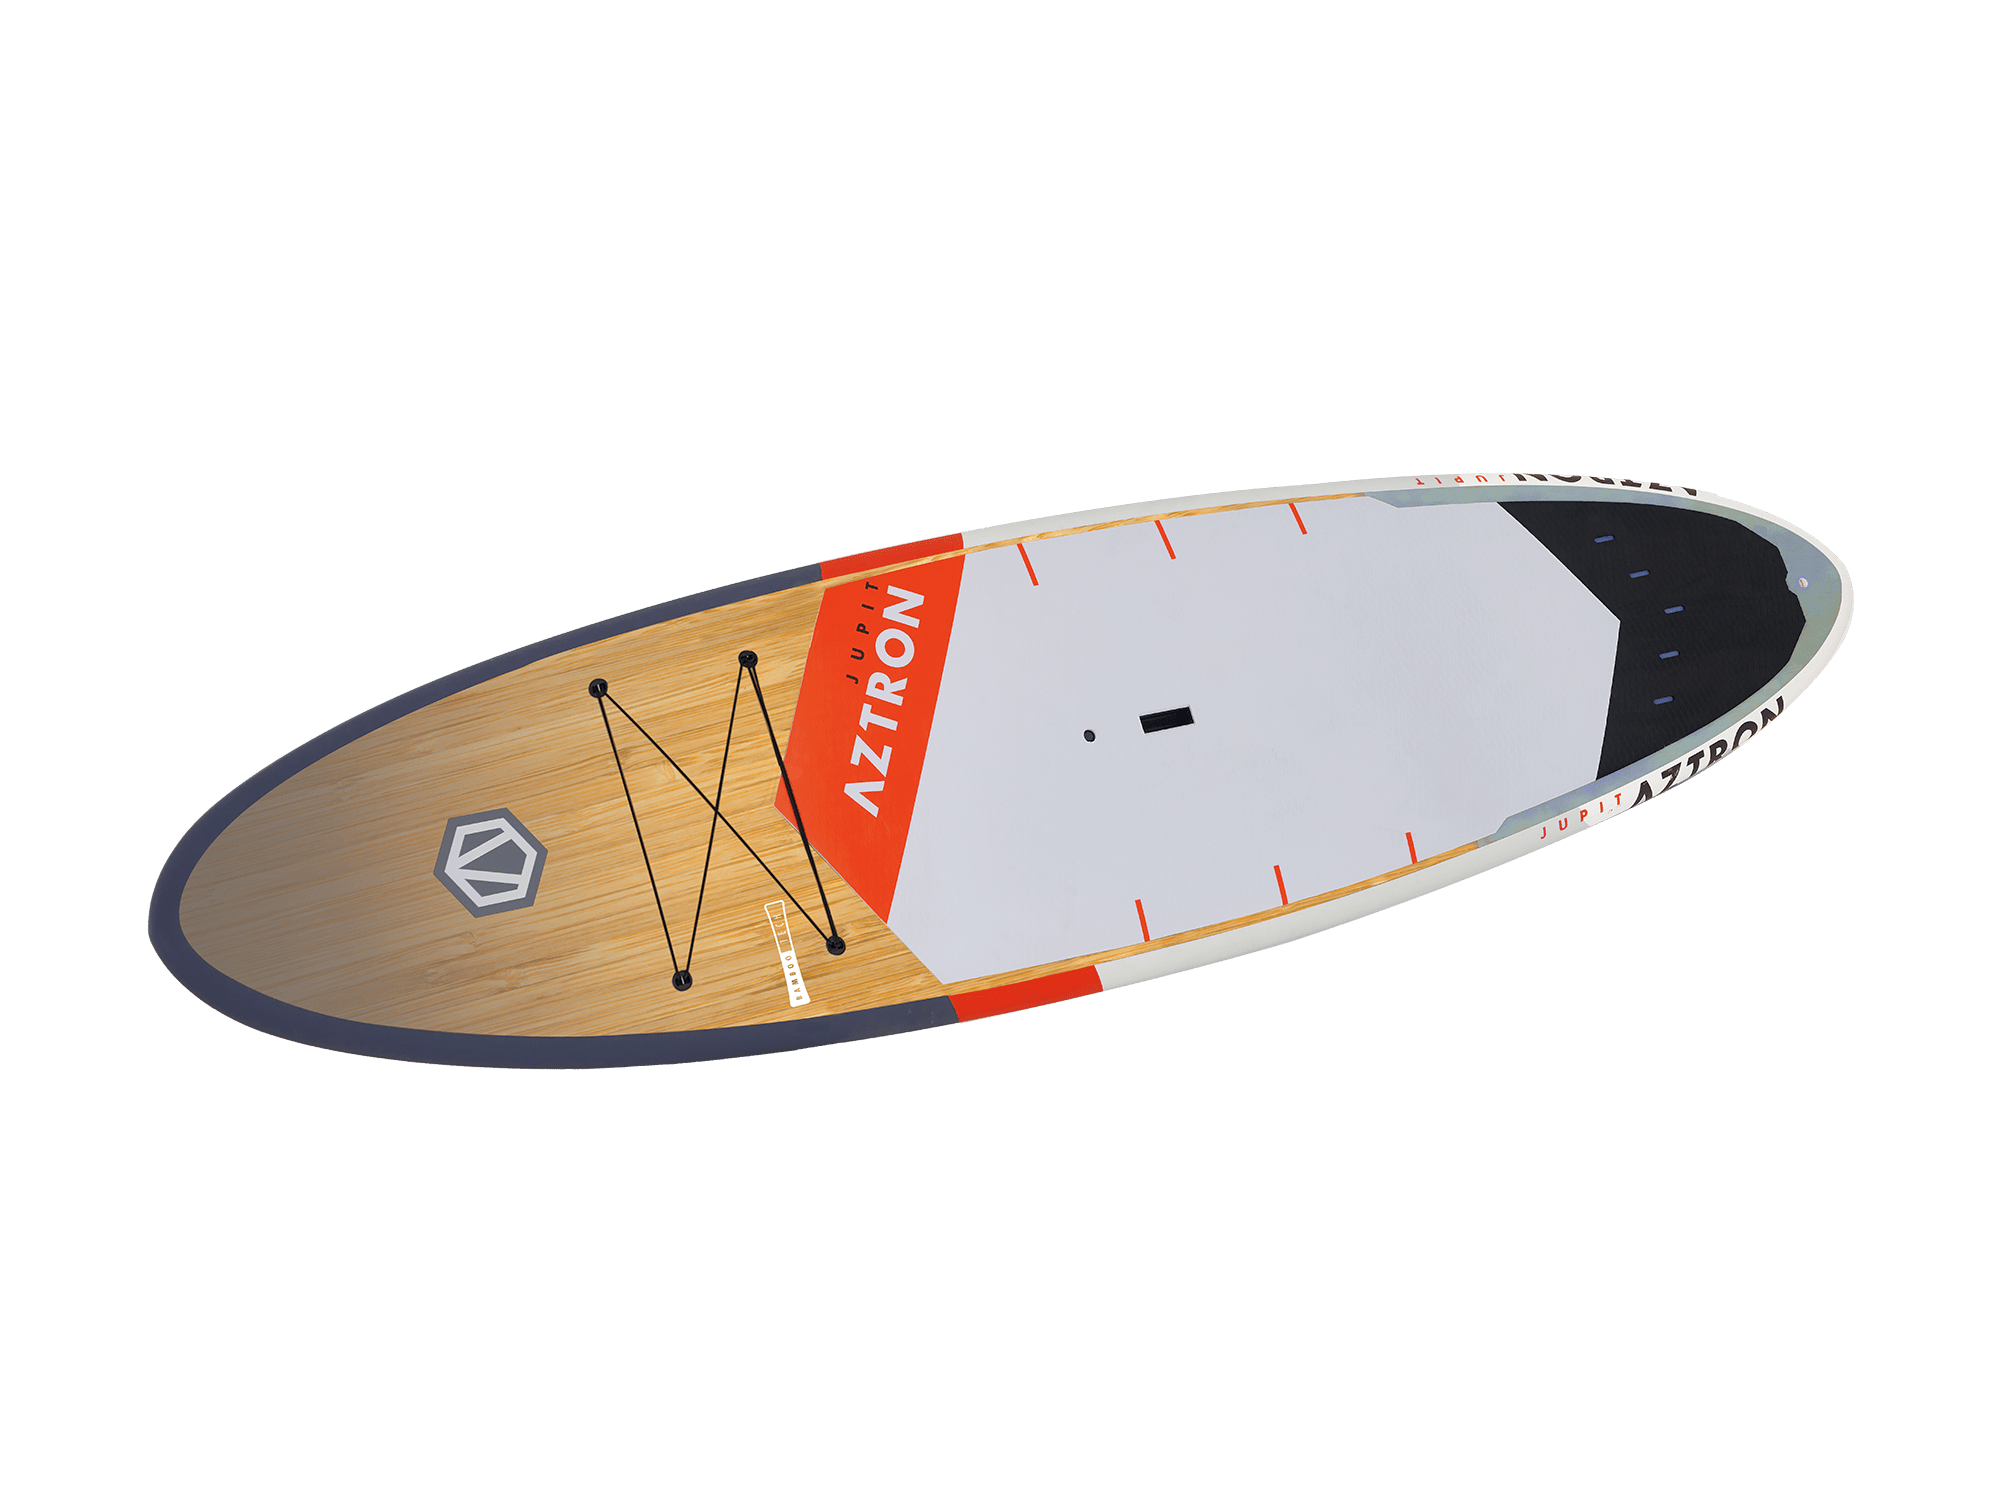 Aztron JUPIT Bamboo All Round - 10' 8"-Paddleboards-Aztron Sports-4